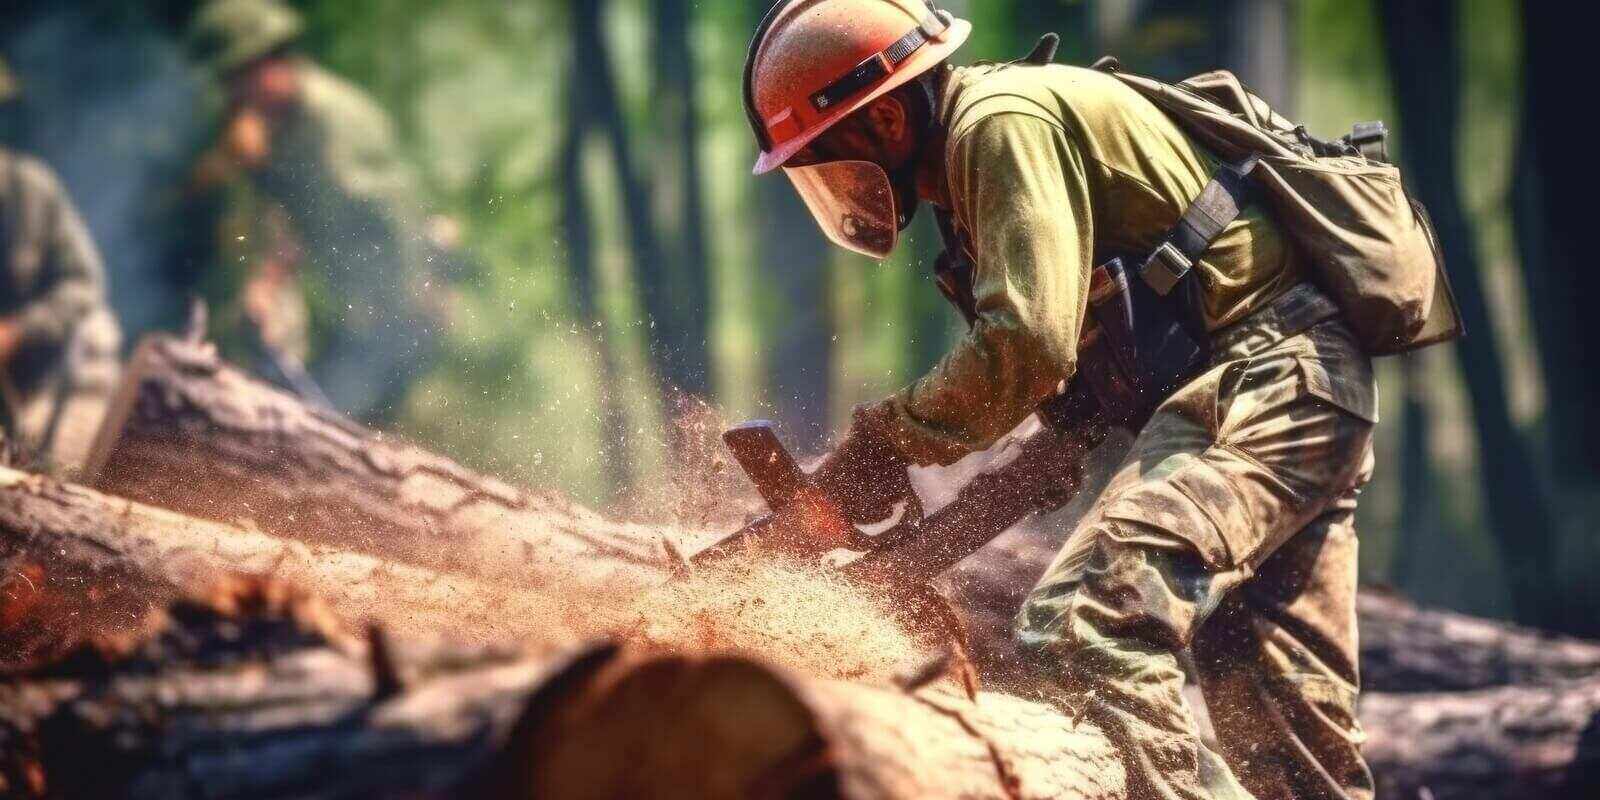 loggers cuts a tree trunk with a chainsaw